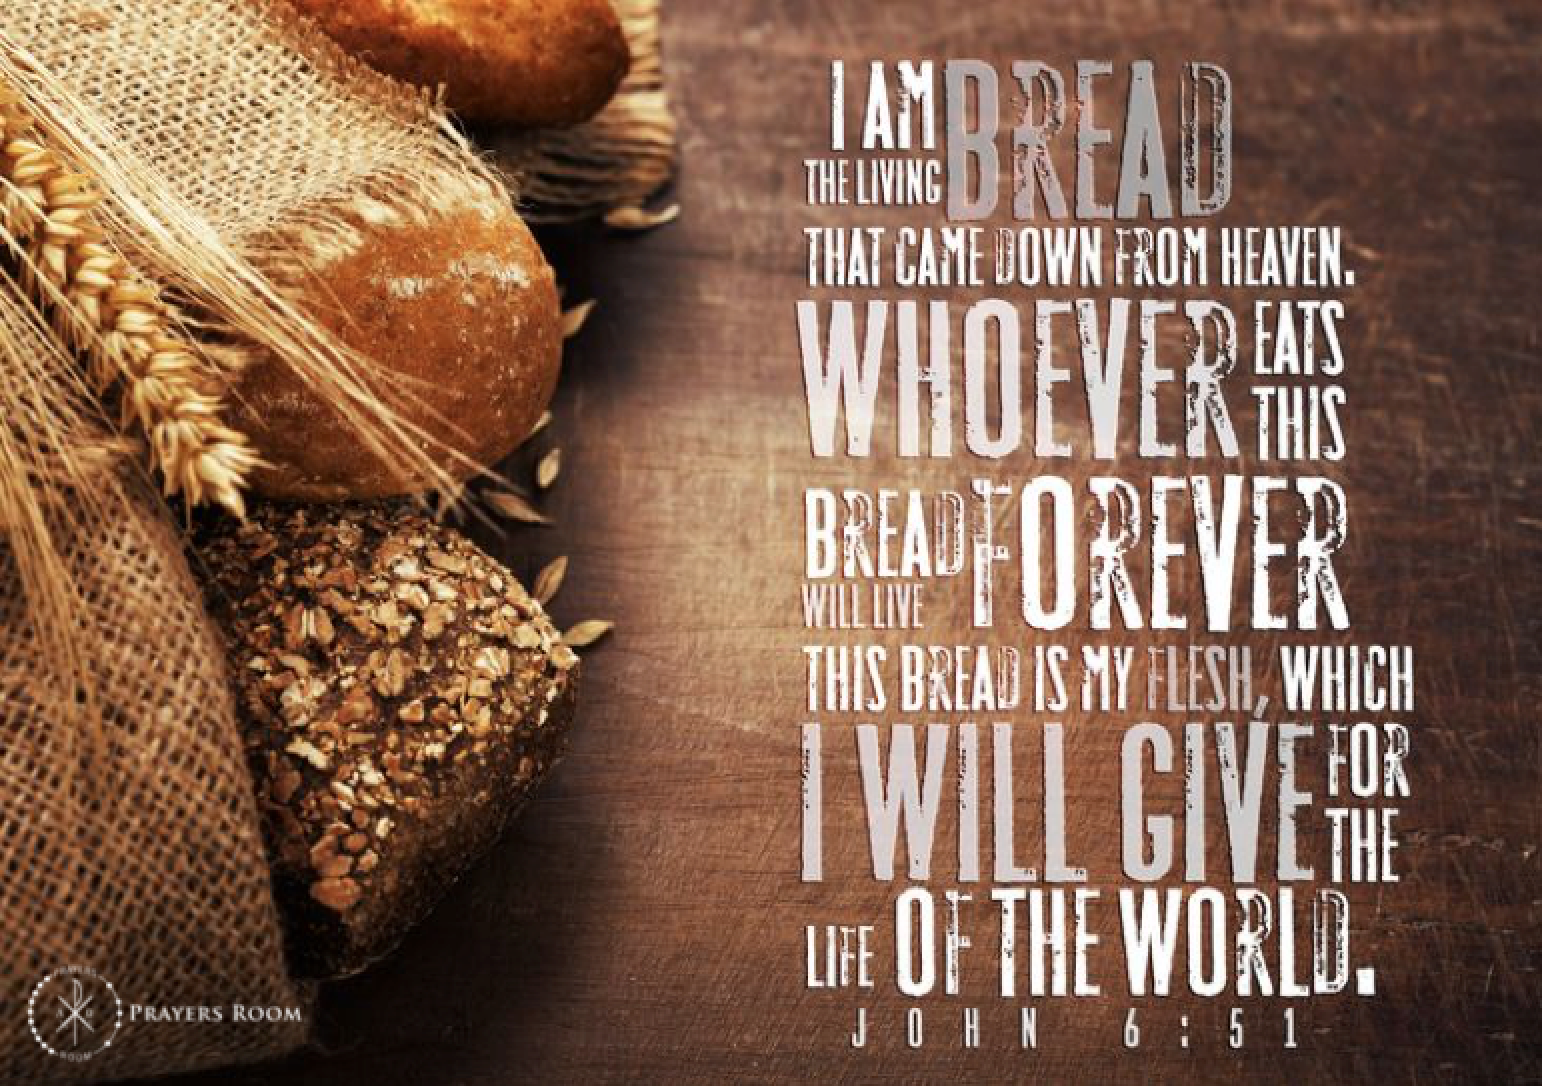 https://prayersroom.com/wp-content/uploads/2016/05/I-am-the-Living-Bread-come-down-from-heaven-John-6-51.png